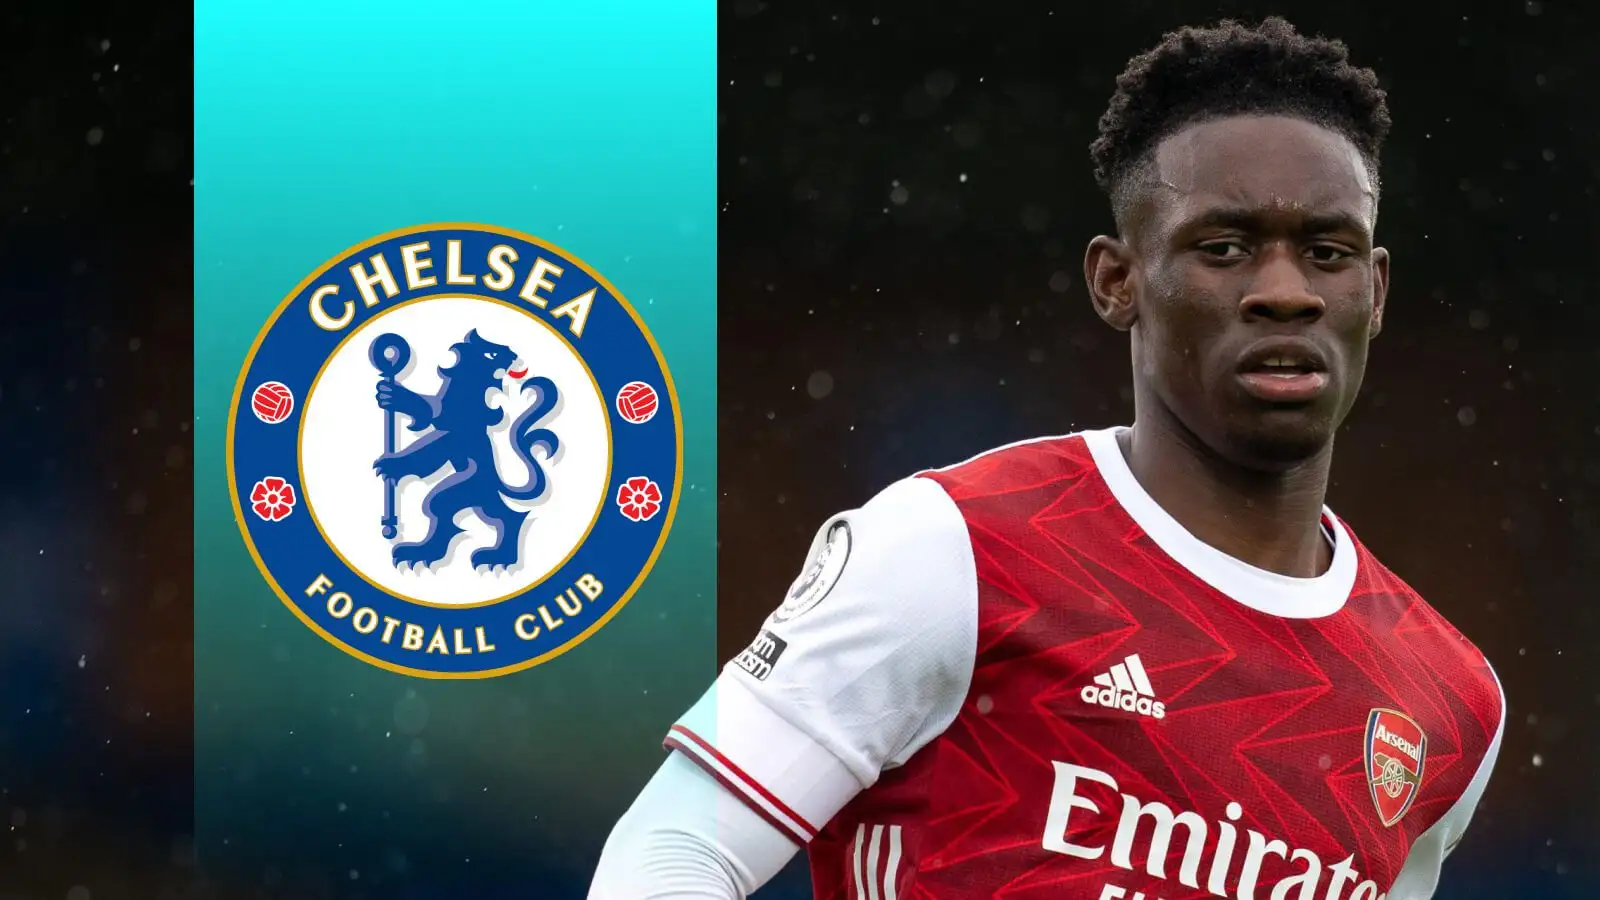 Arsenal man in talks with Chelsea